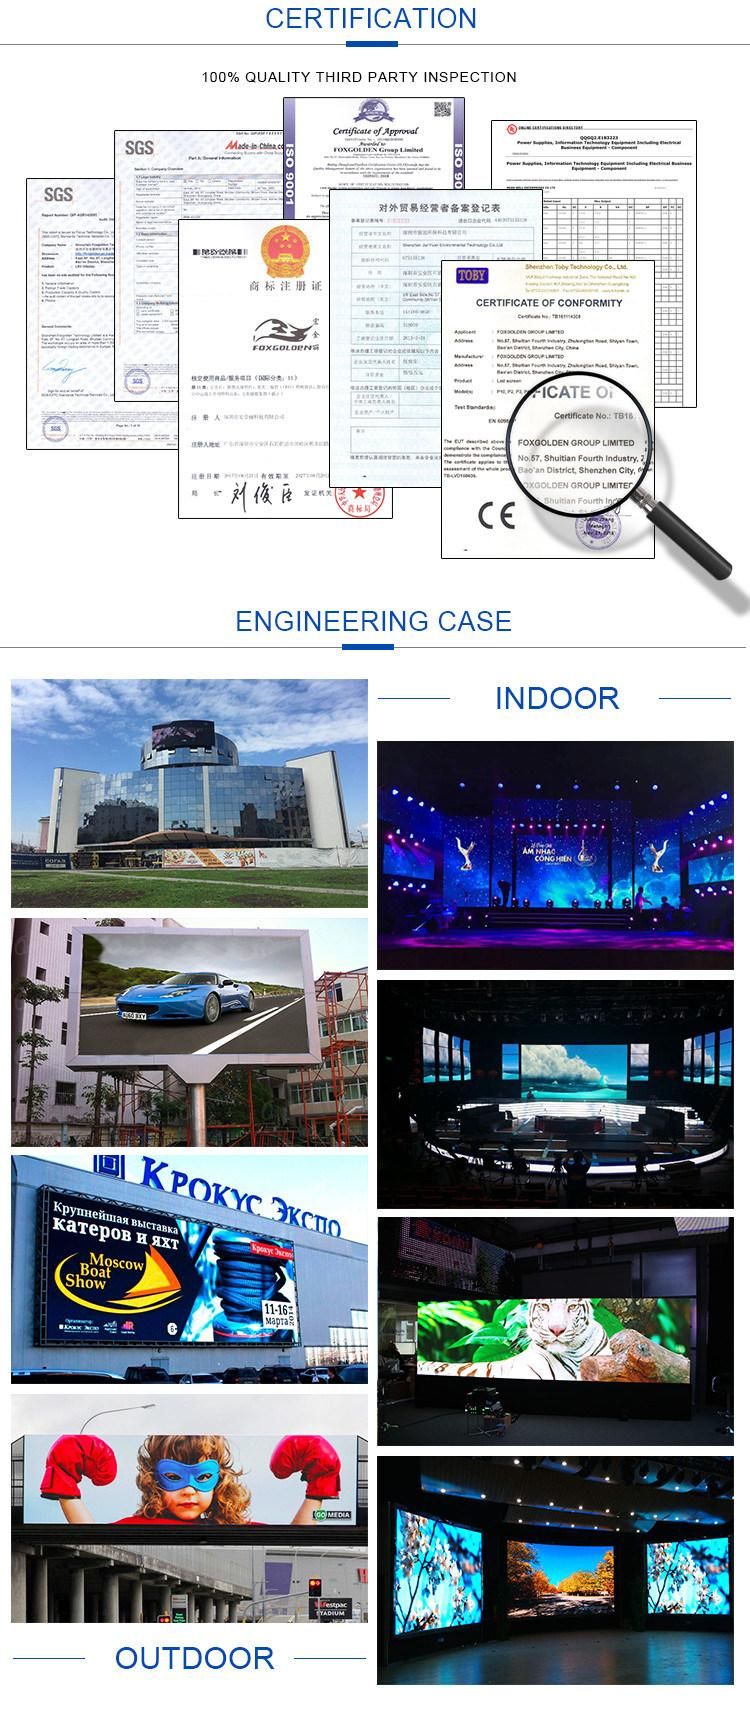 HD 3D Indoor P3.91 P4.81 P2 P2.5 P3 P4 P5 Full Color LED Video Wall Stage for Concert Display Flexible Screens China Price